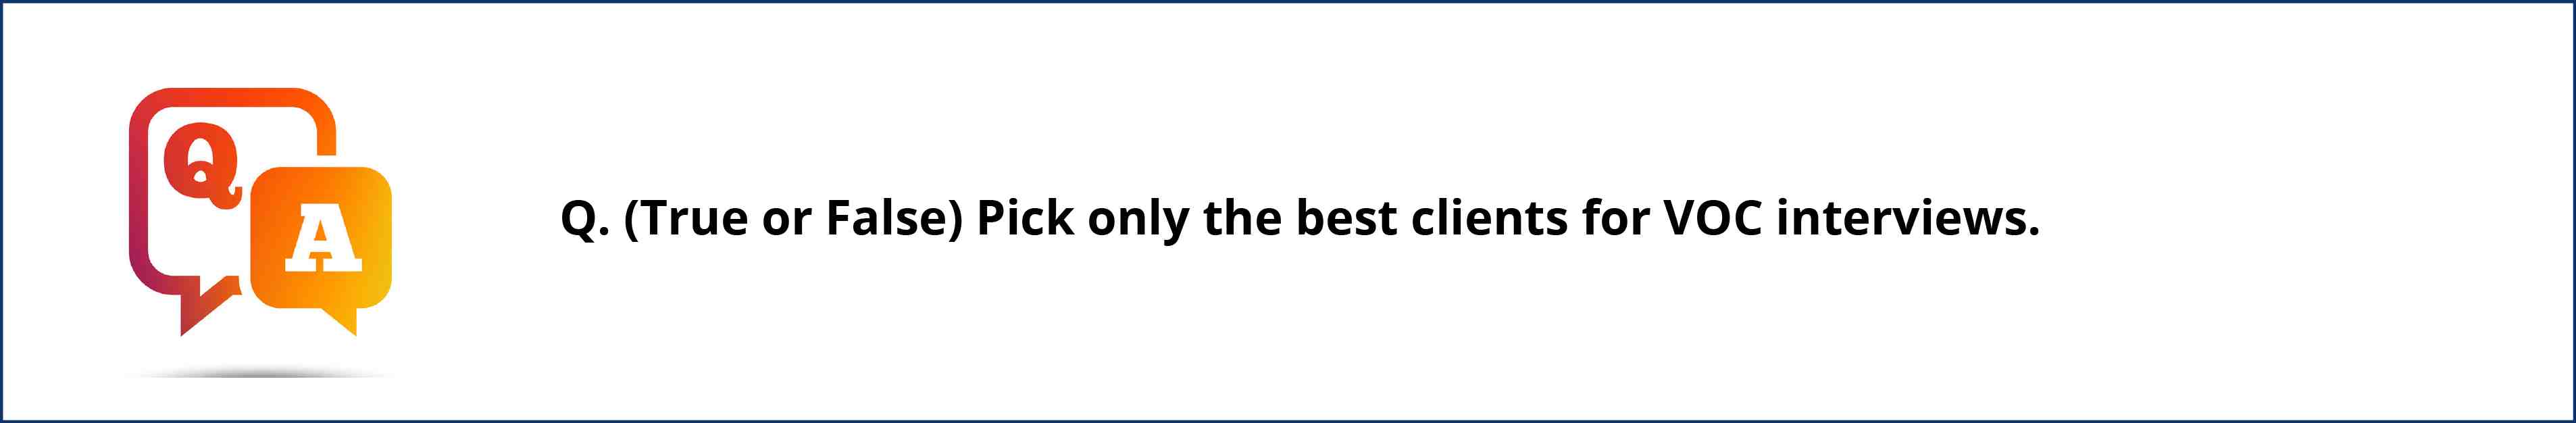 Pick only the best clients for VOC interview